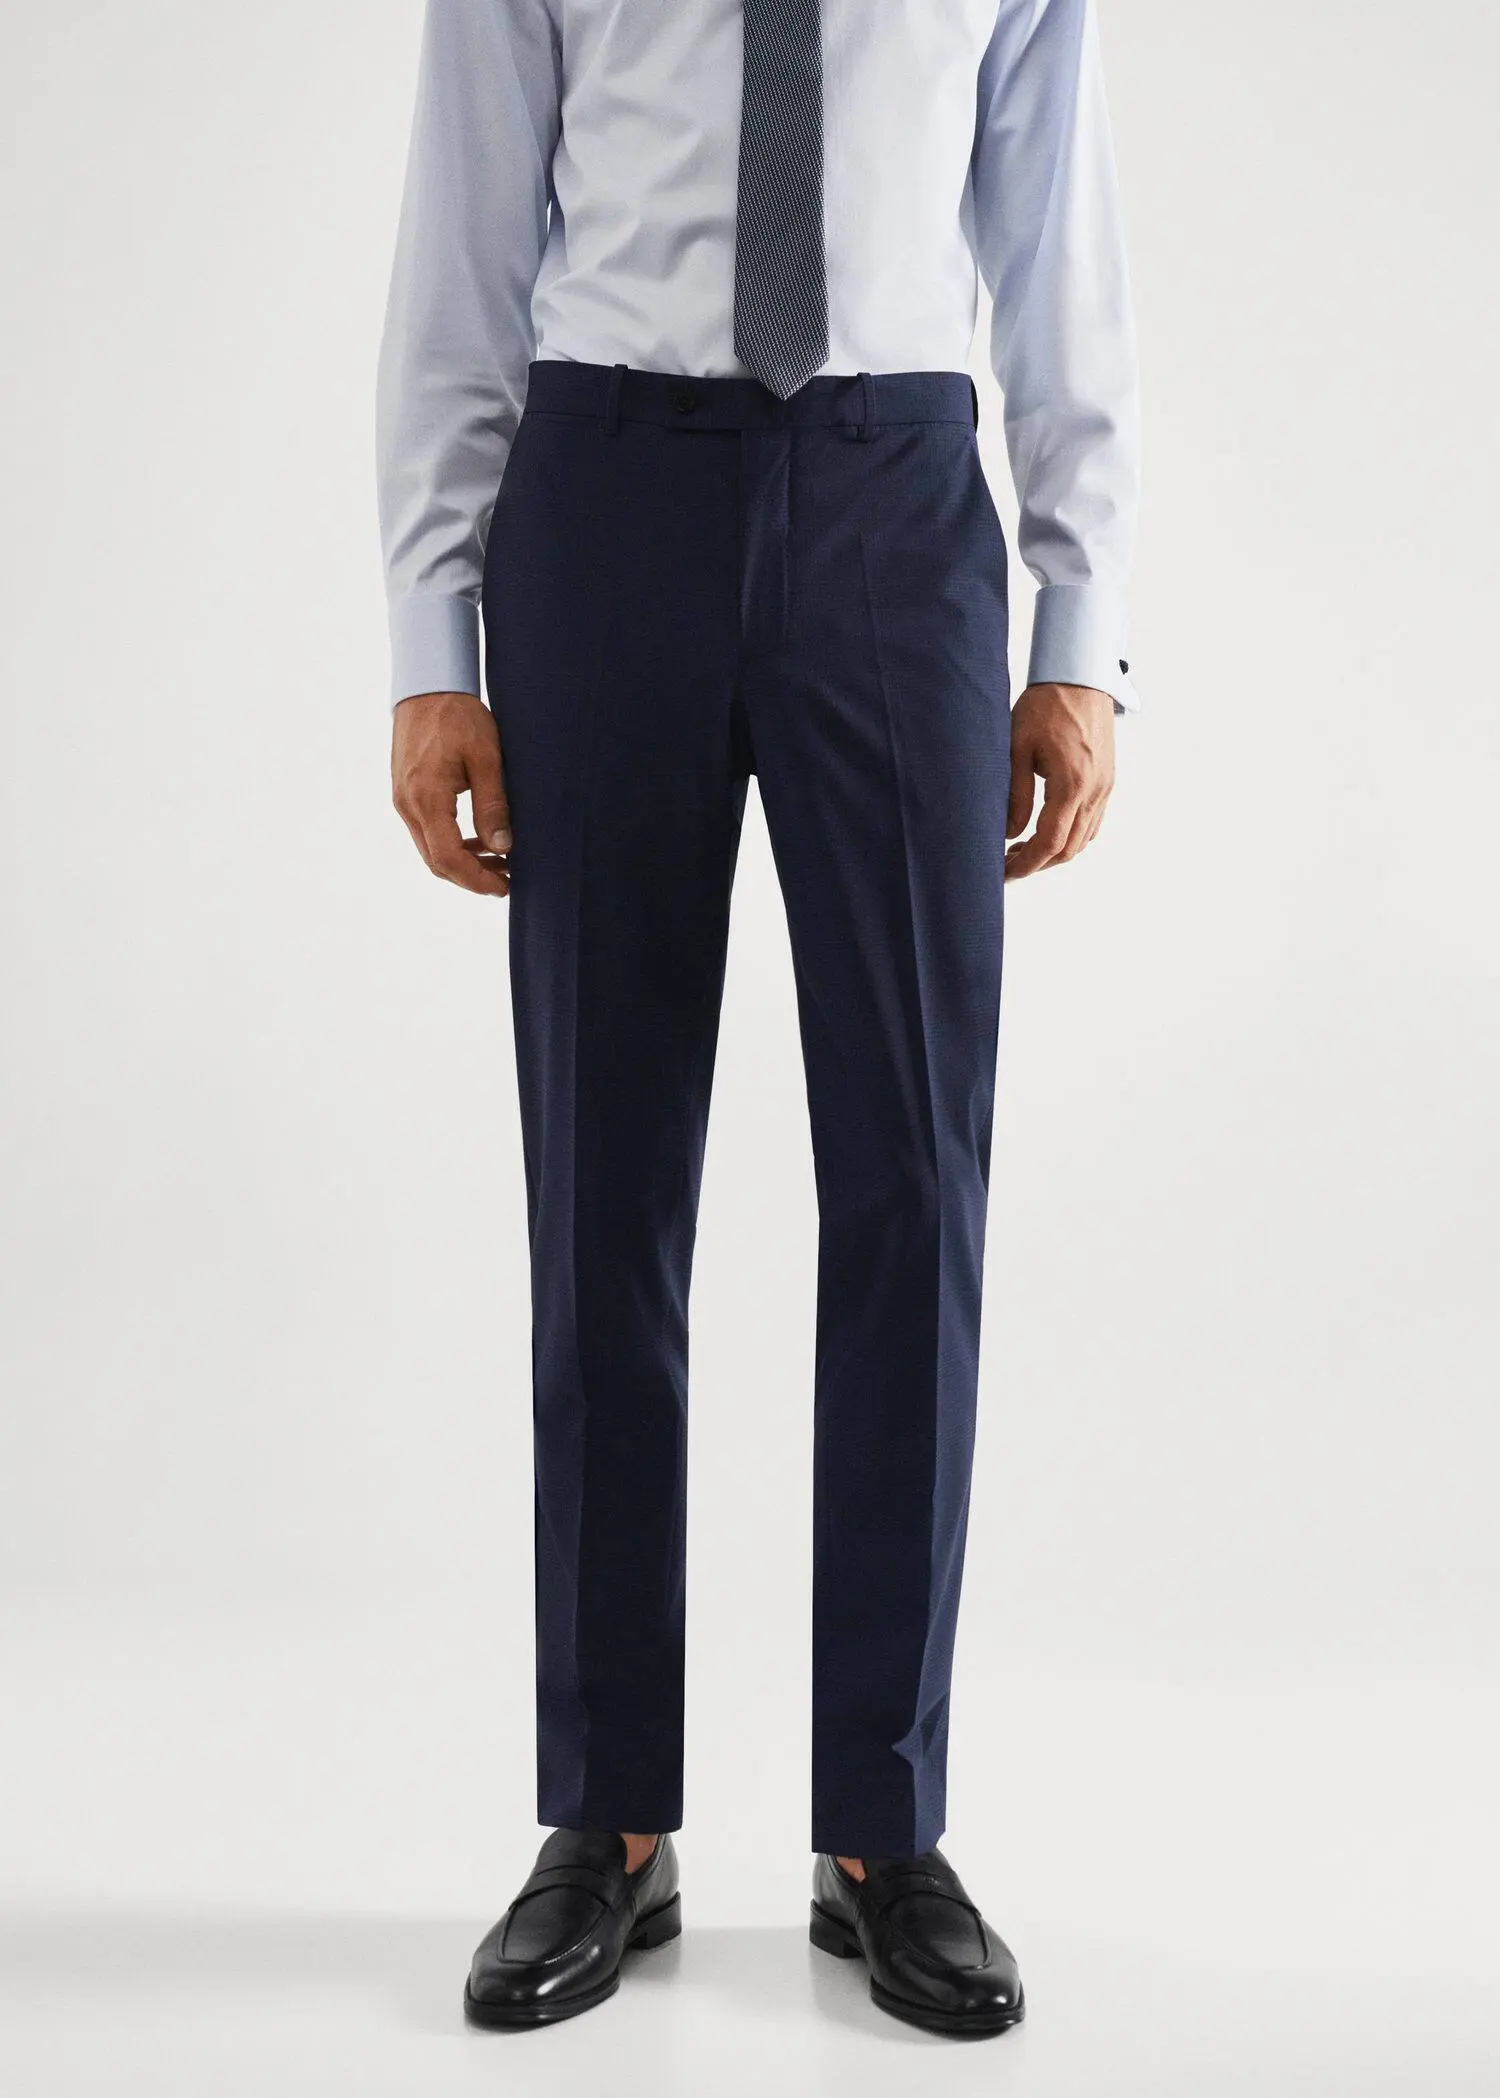 Mango Wool slim-fit check suit pants. a man wearing a suit and tie standing in front of a white wall. 